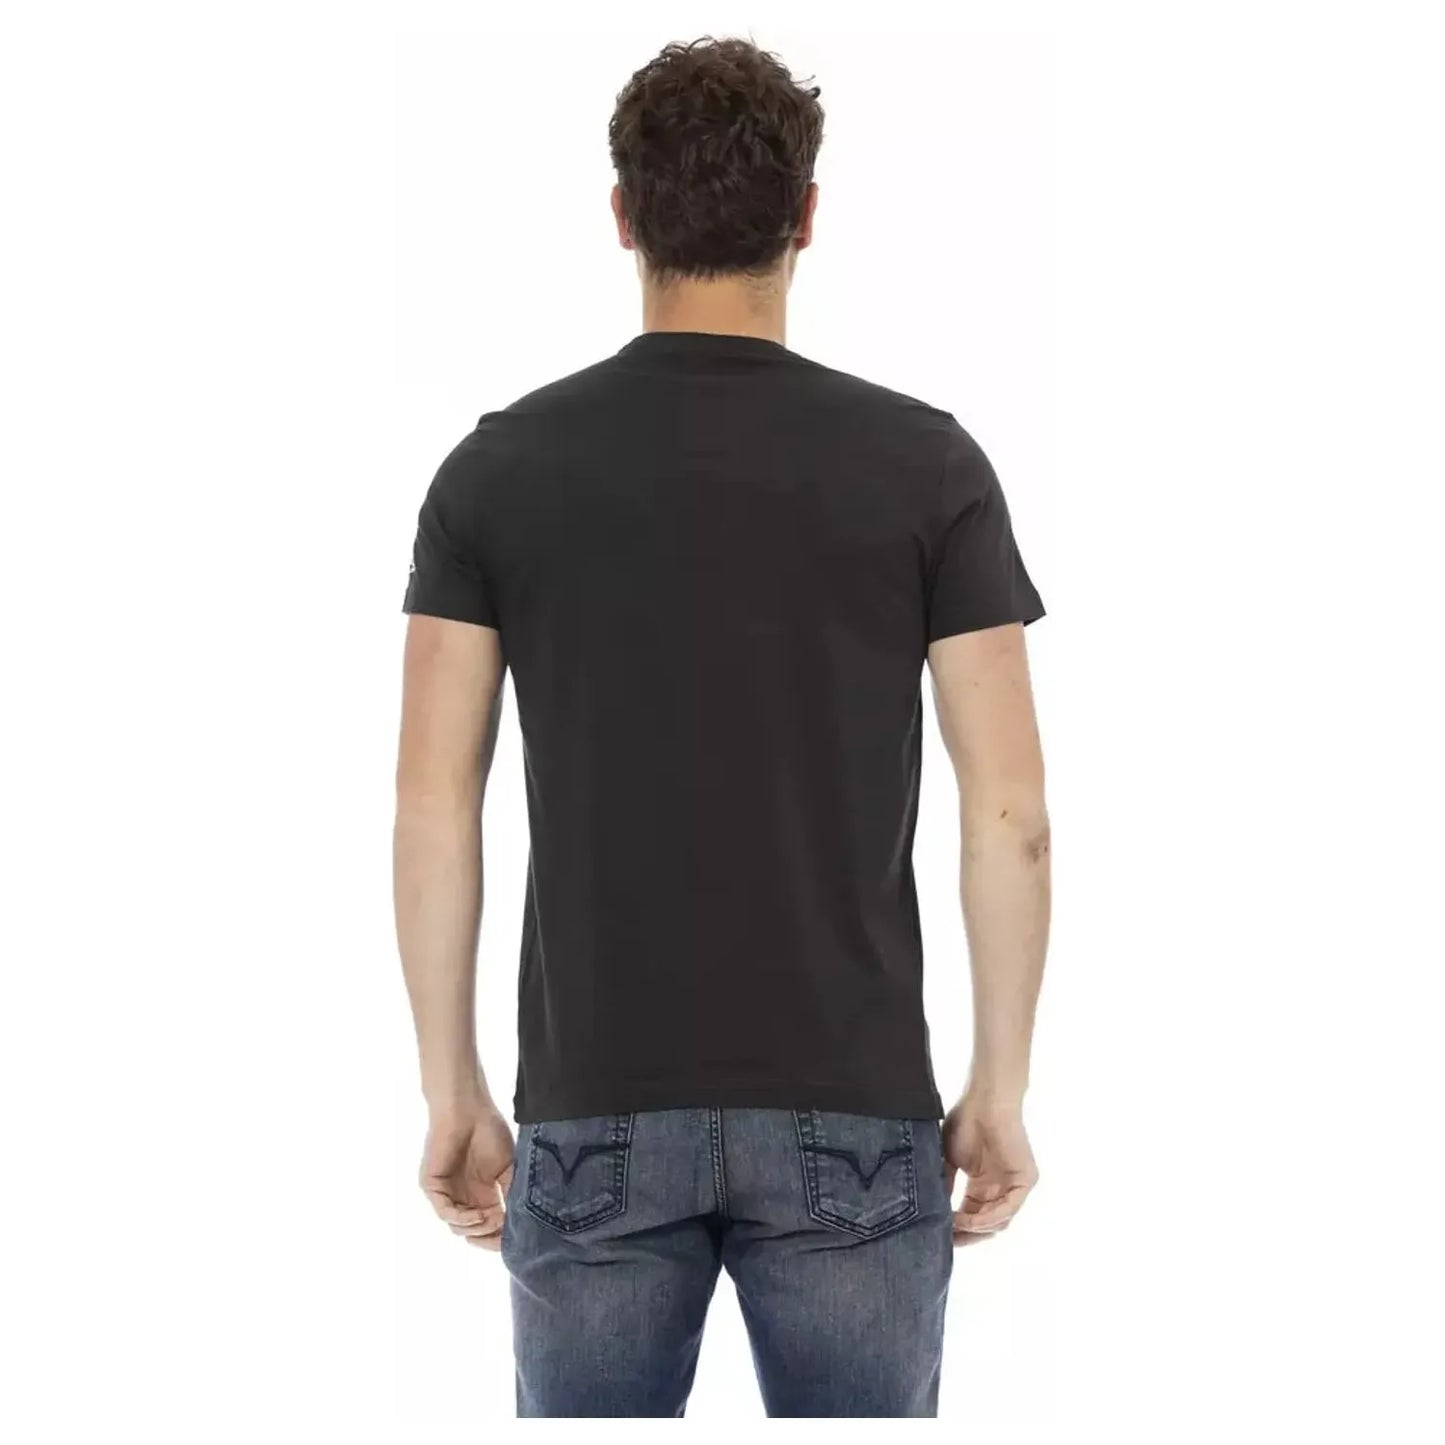 Trussardi Action Elevated Casual Black Short Sleeve Tee black-cotton-t-shirt-75